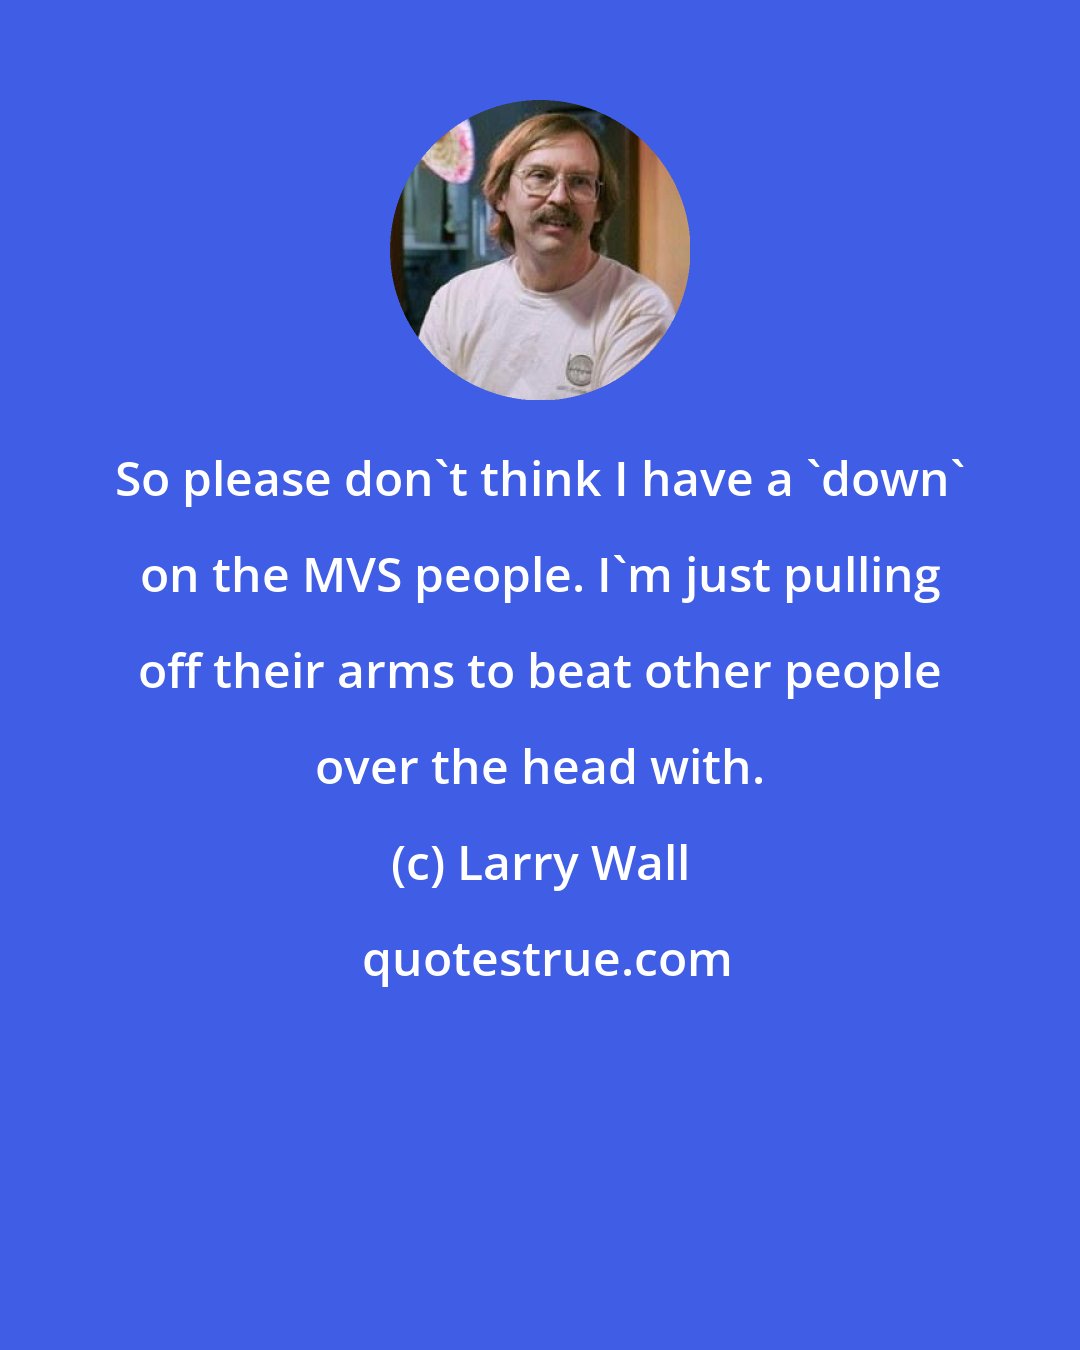 Larry Wall: So please don't think I have a 'down' on the MVS people. I'm just pulling off their arms to beat other people over the head with.